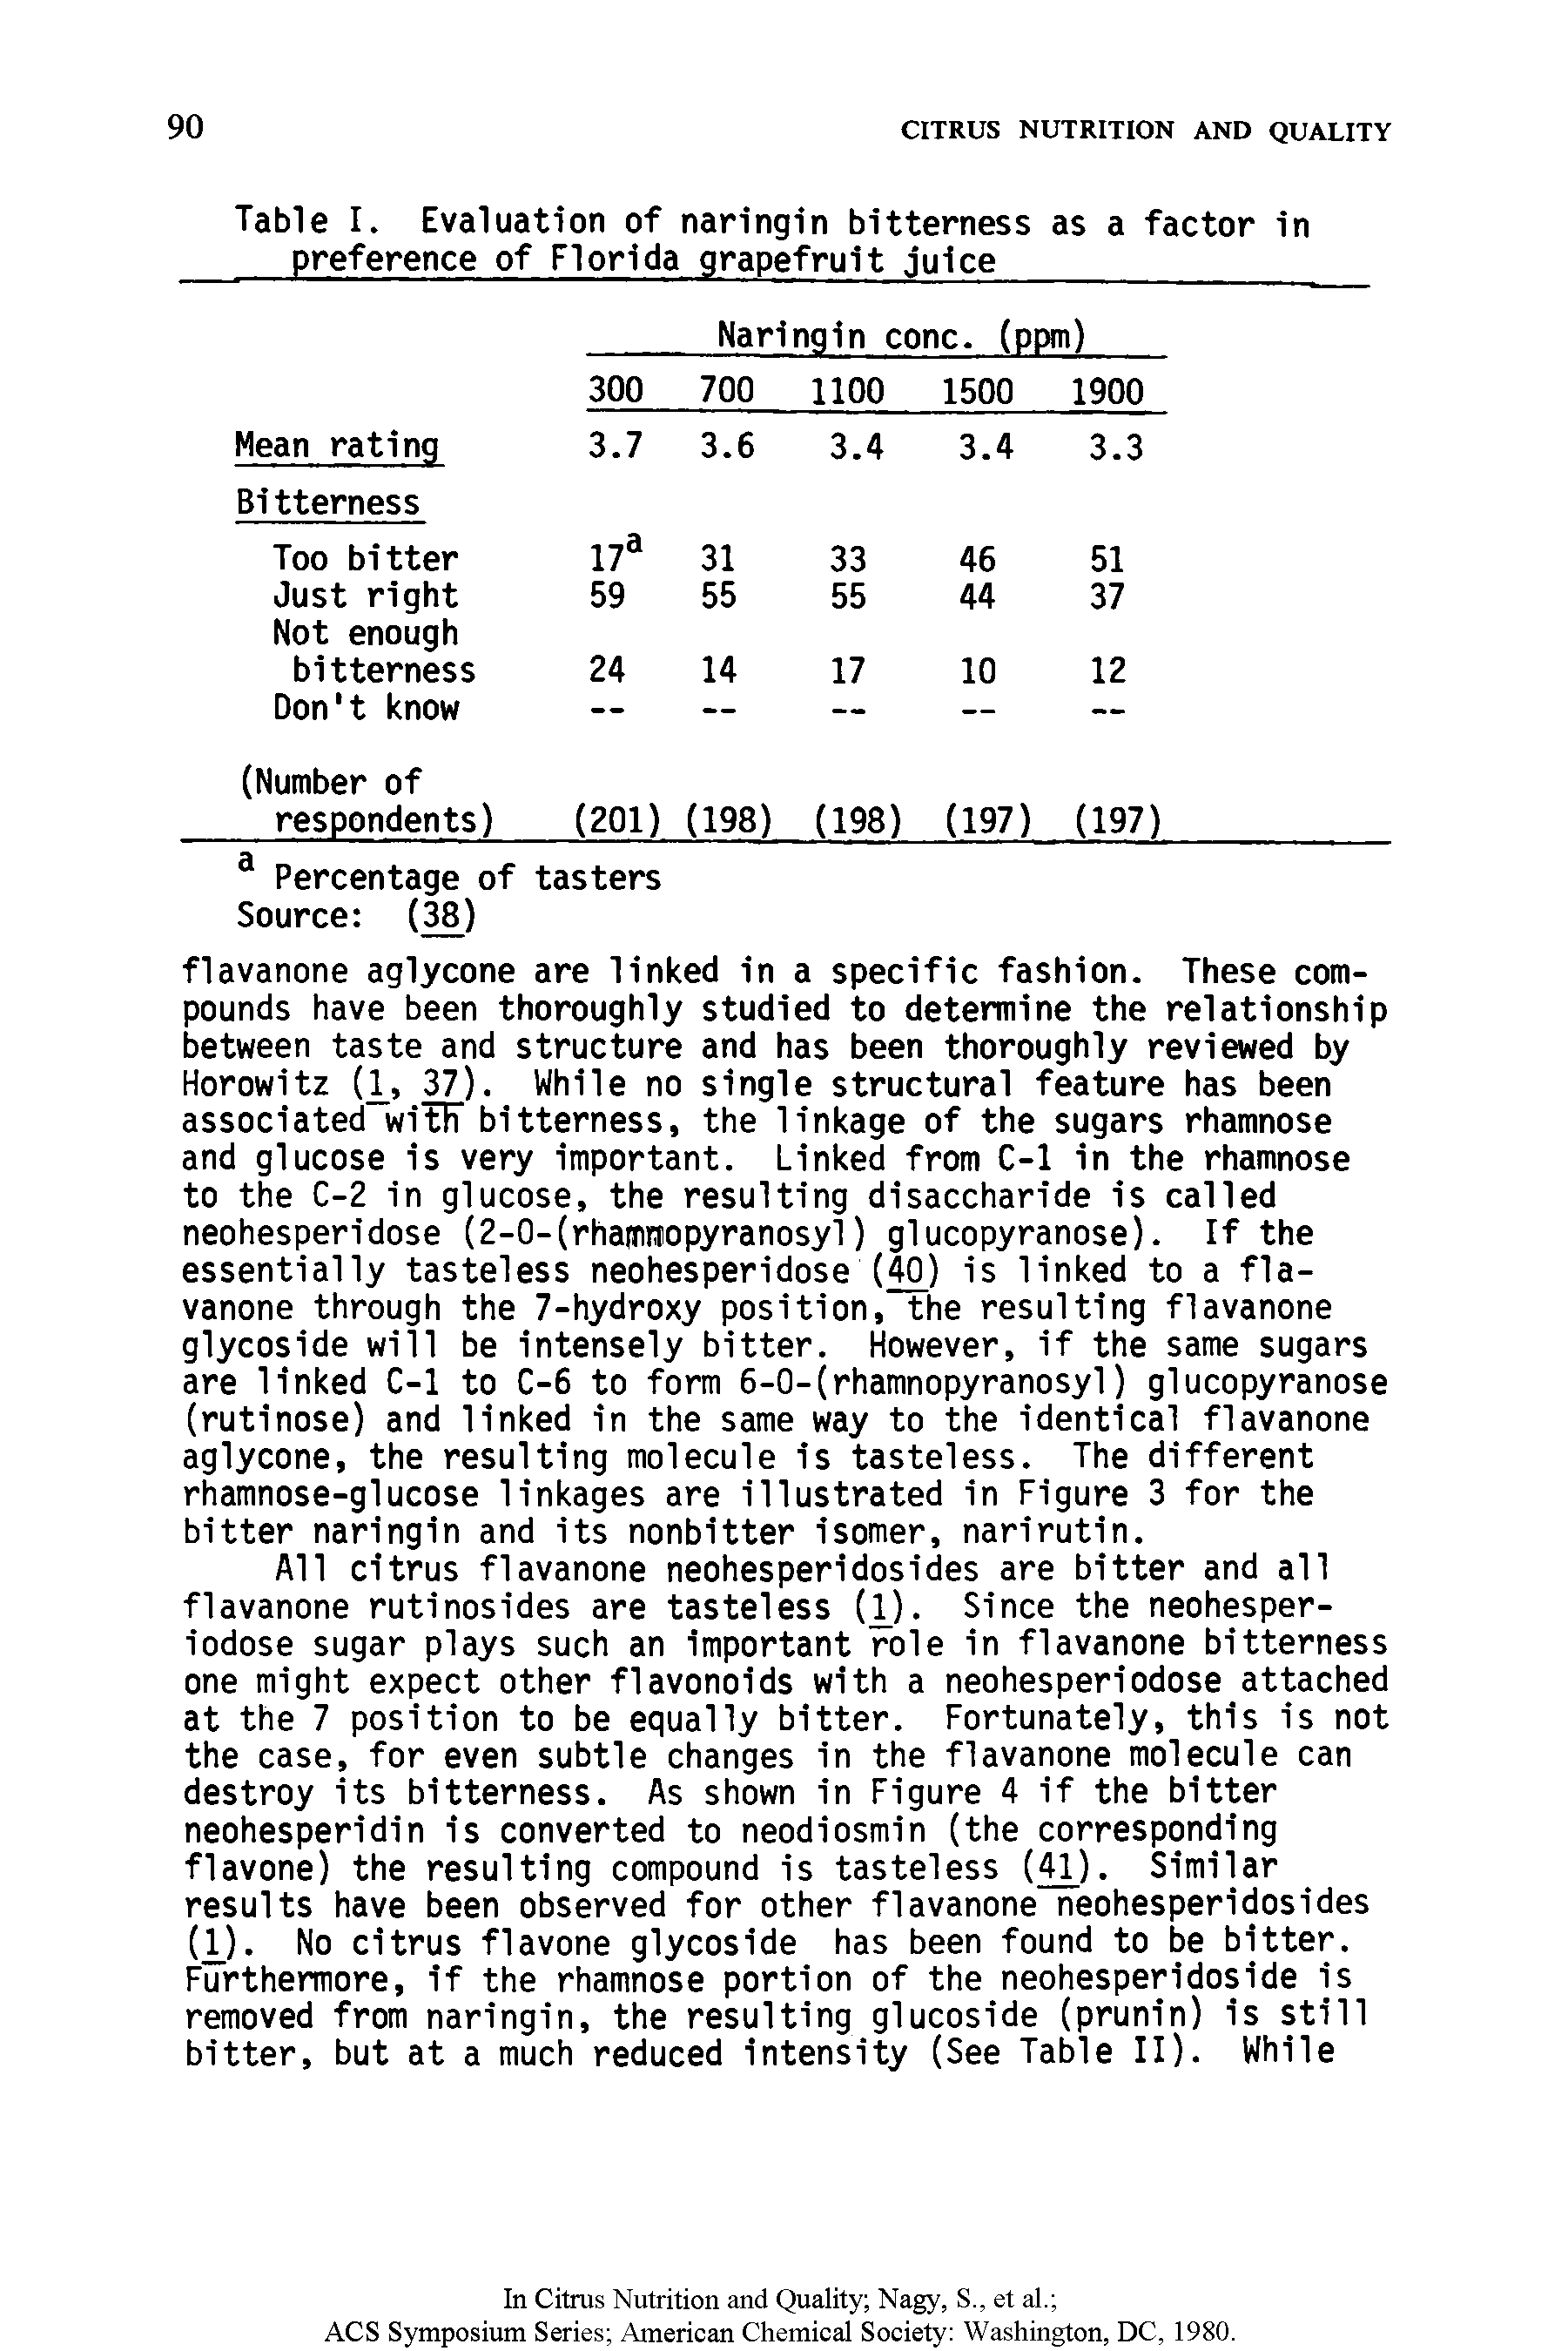 Table I. Evaluation of naringin bitterness as a factor in preference of Florida grapefruit juice ...